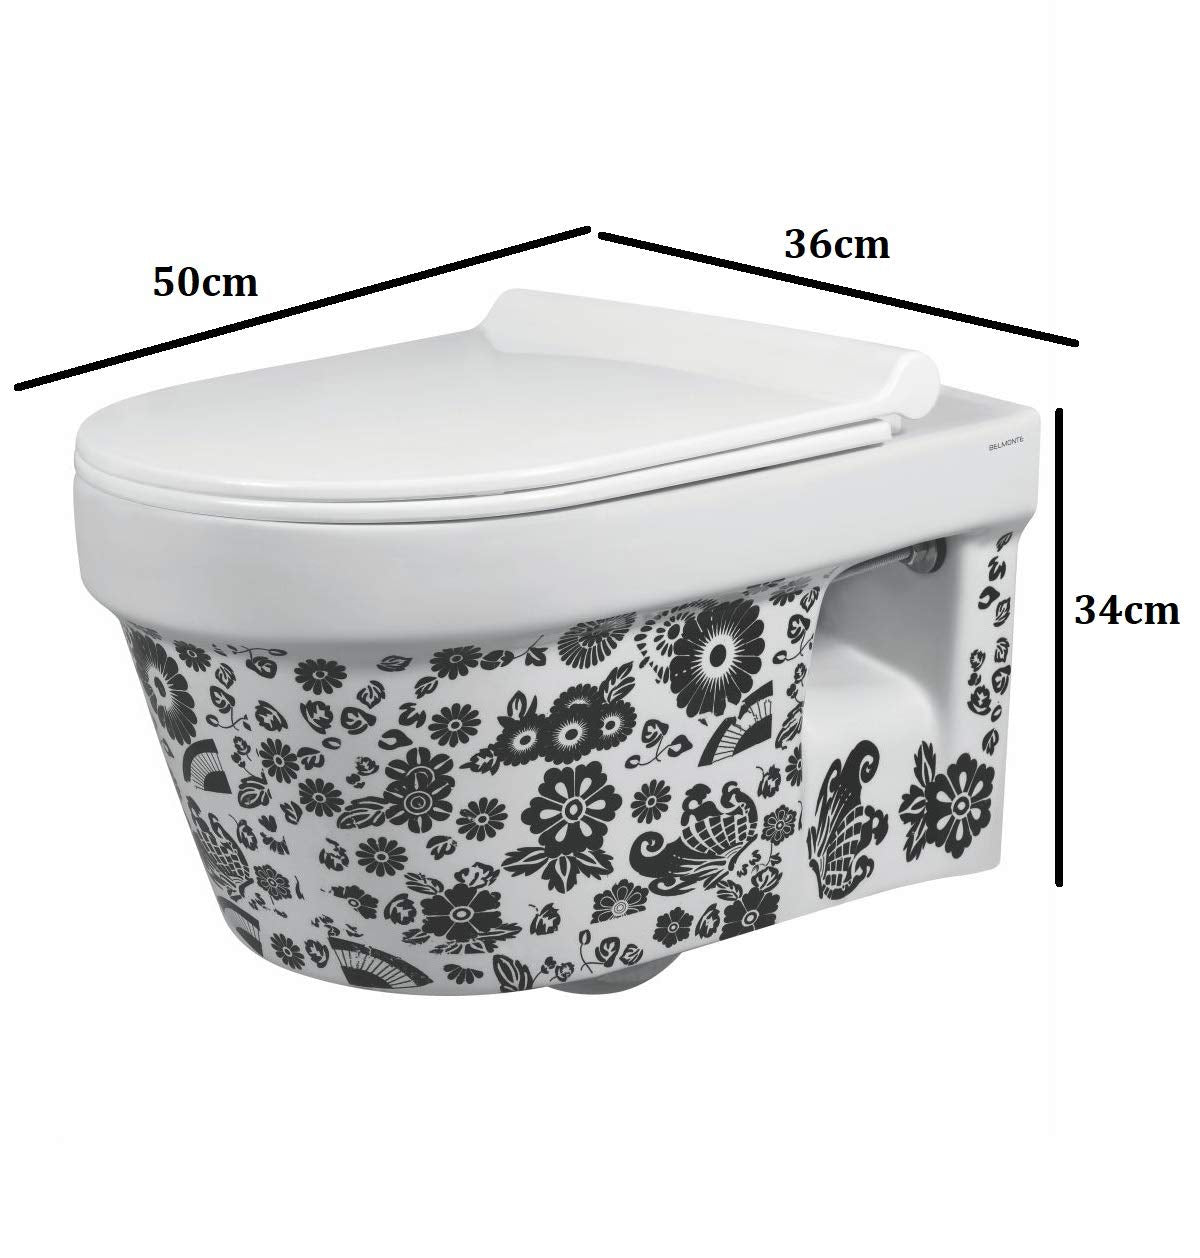 B Backline Ceramic Wall Mount Wall Hung Western Toilet Rimless Commode 20 X 14 X 13 Inches